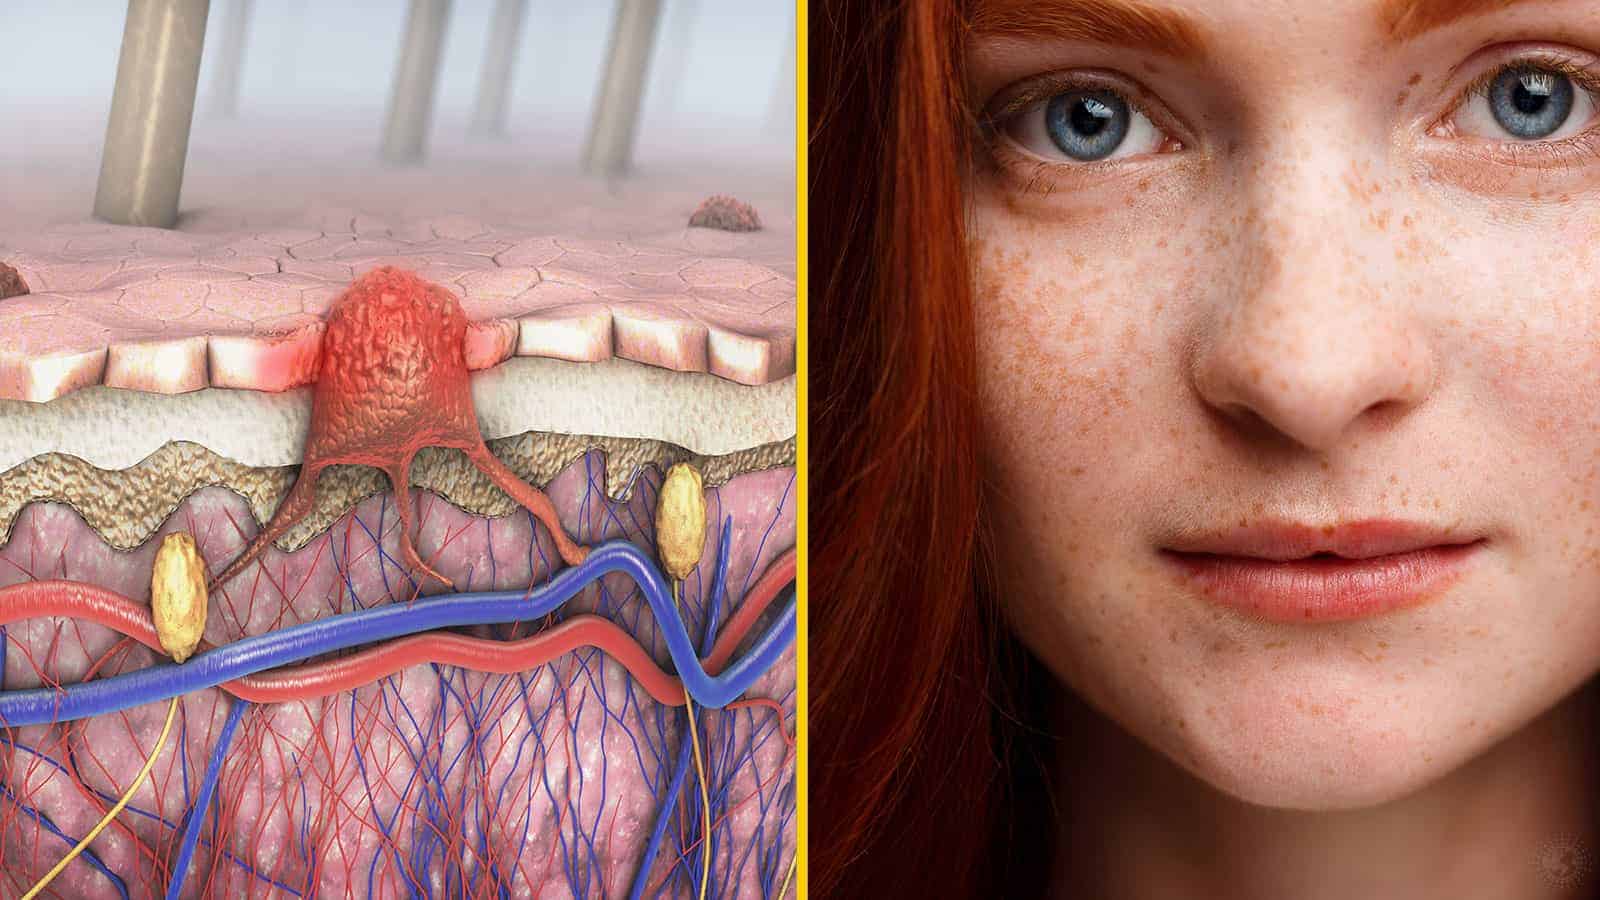 Researchers Reveal Why Red Hair Means You Have A Higher Risk For Skin Cancer